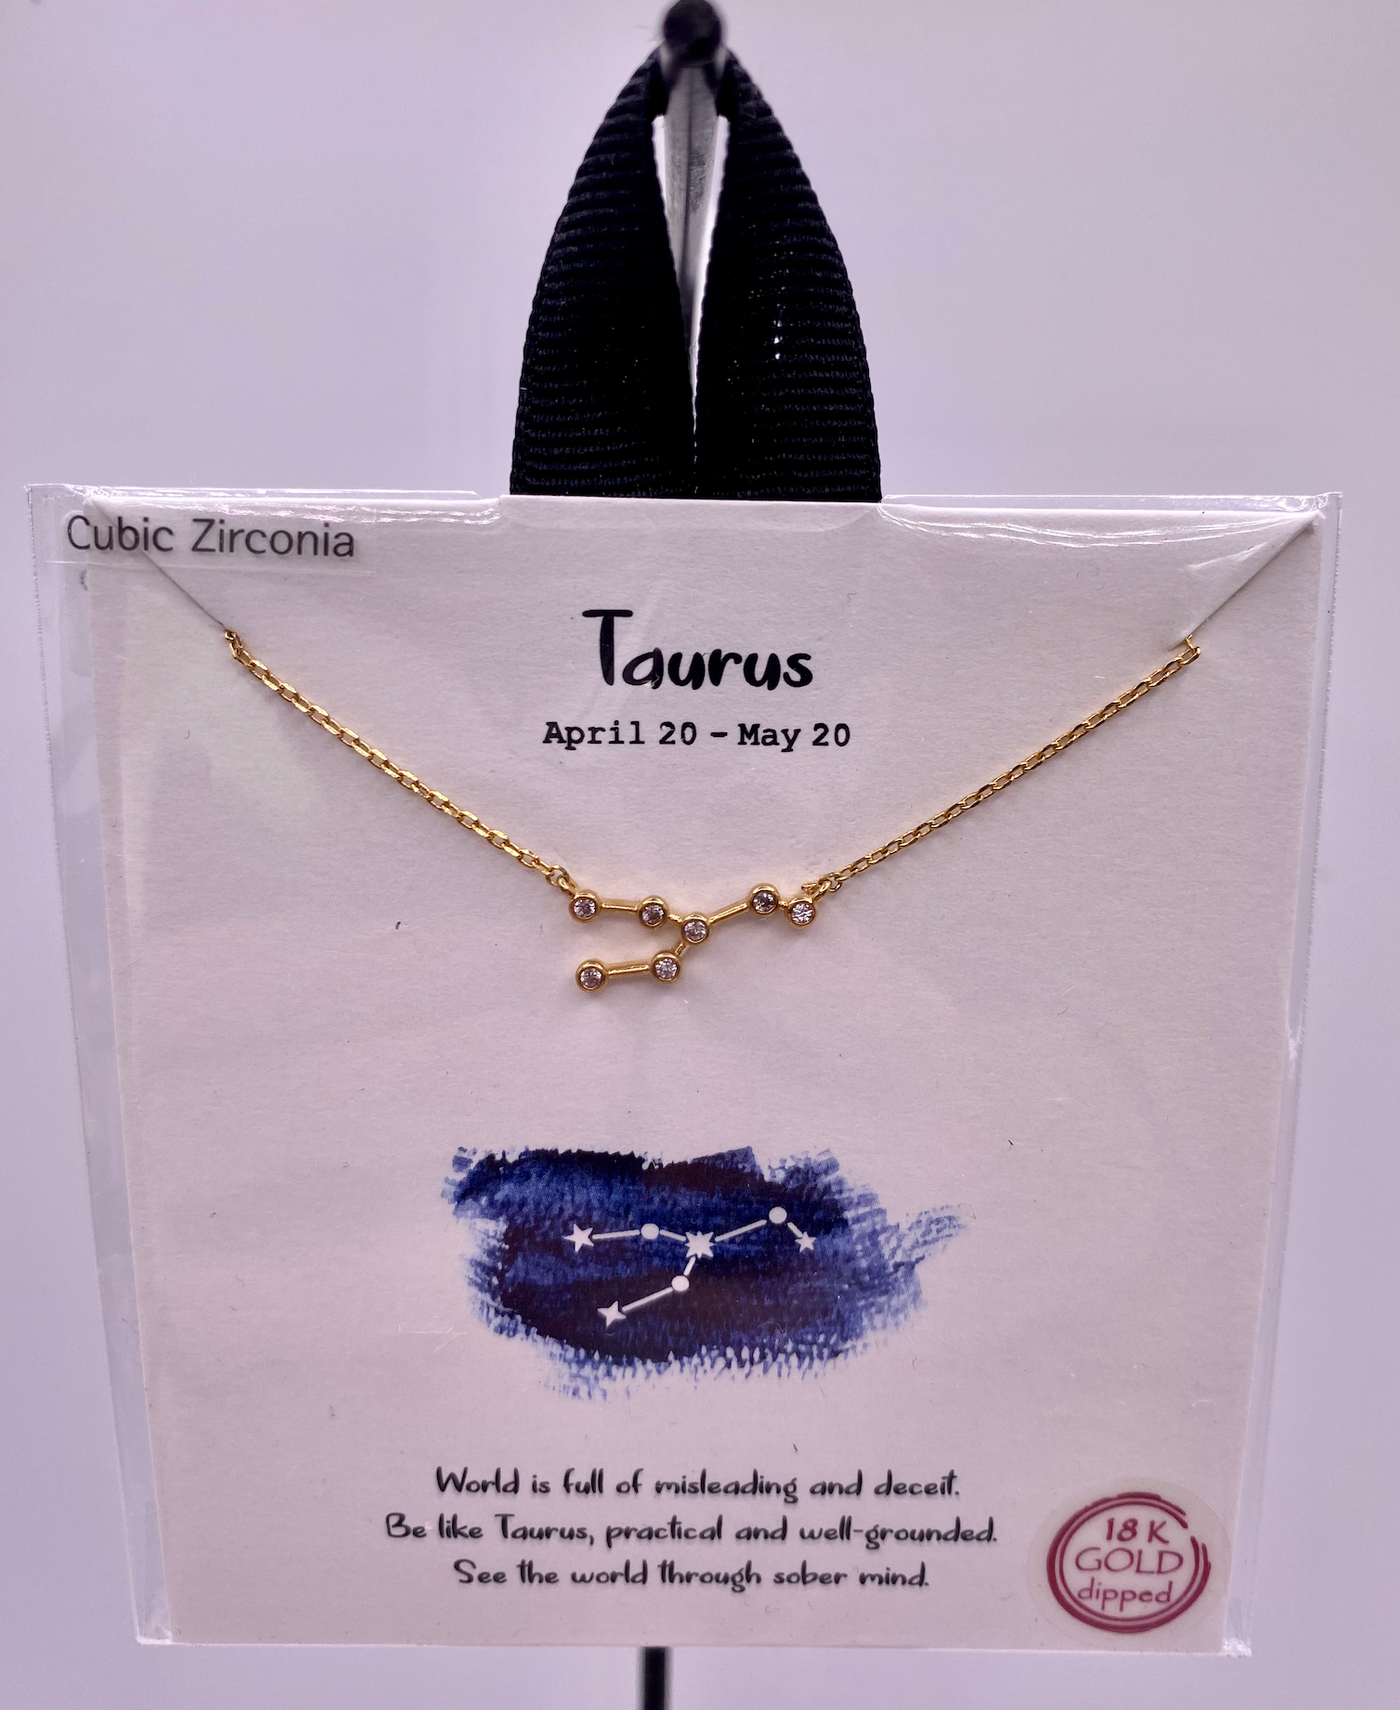 Taurus Zodiac Sign Necklace April 20 - May 20